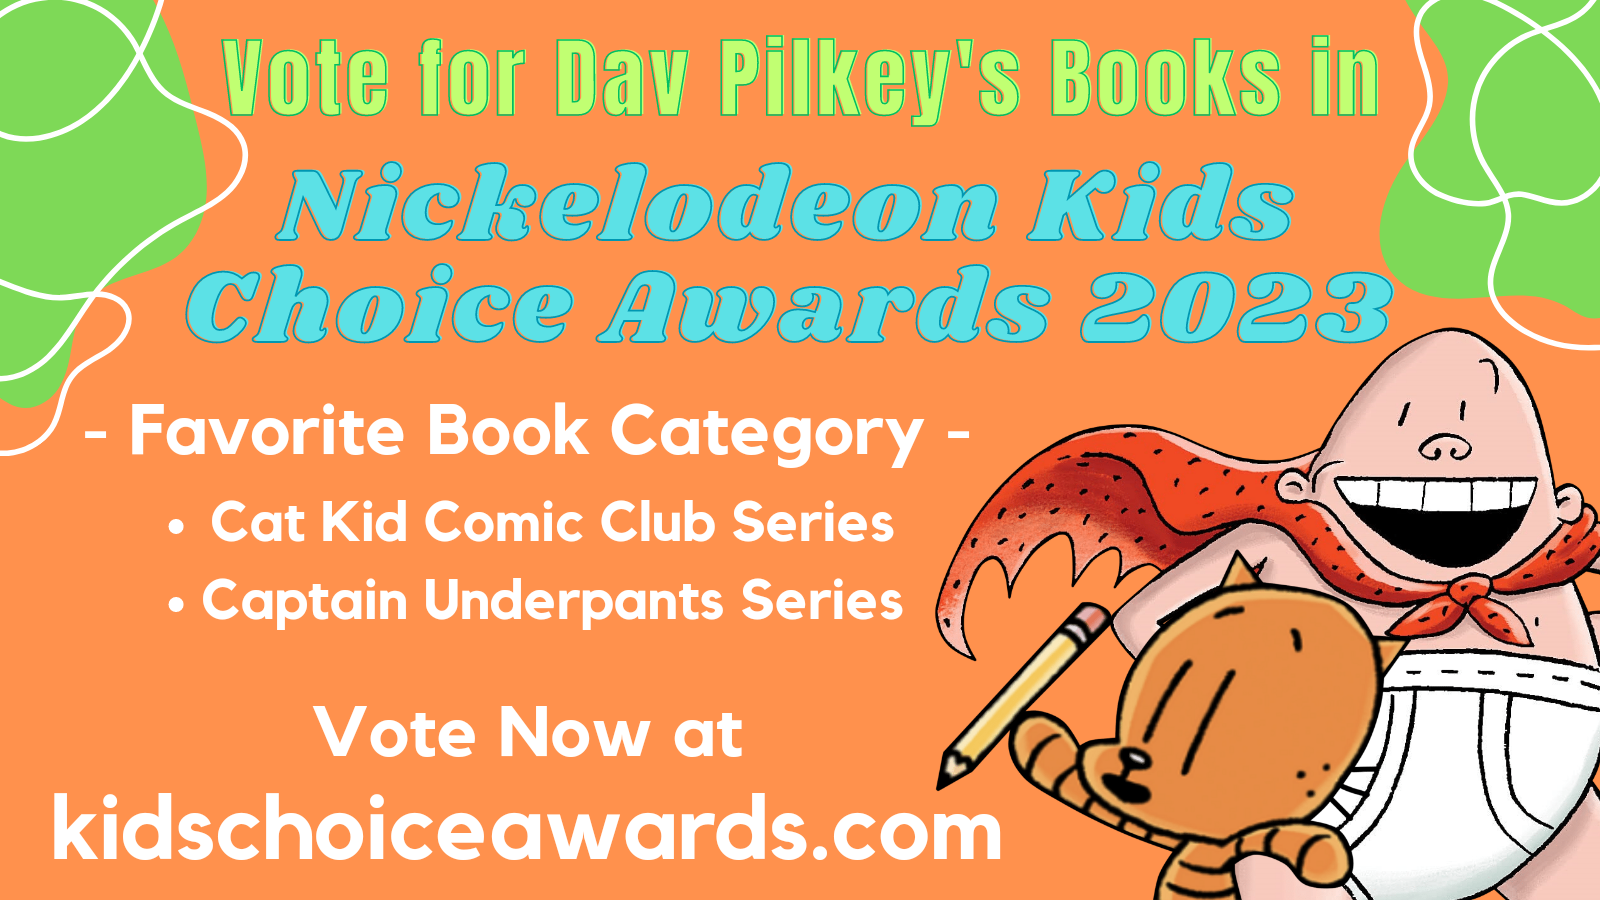 Giveaway: My Comic Book & IlluStory Kits for Kids - Mom's Choice Awards